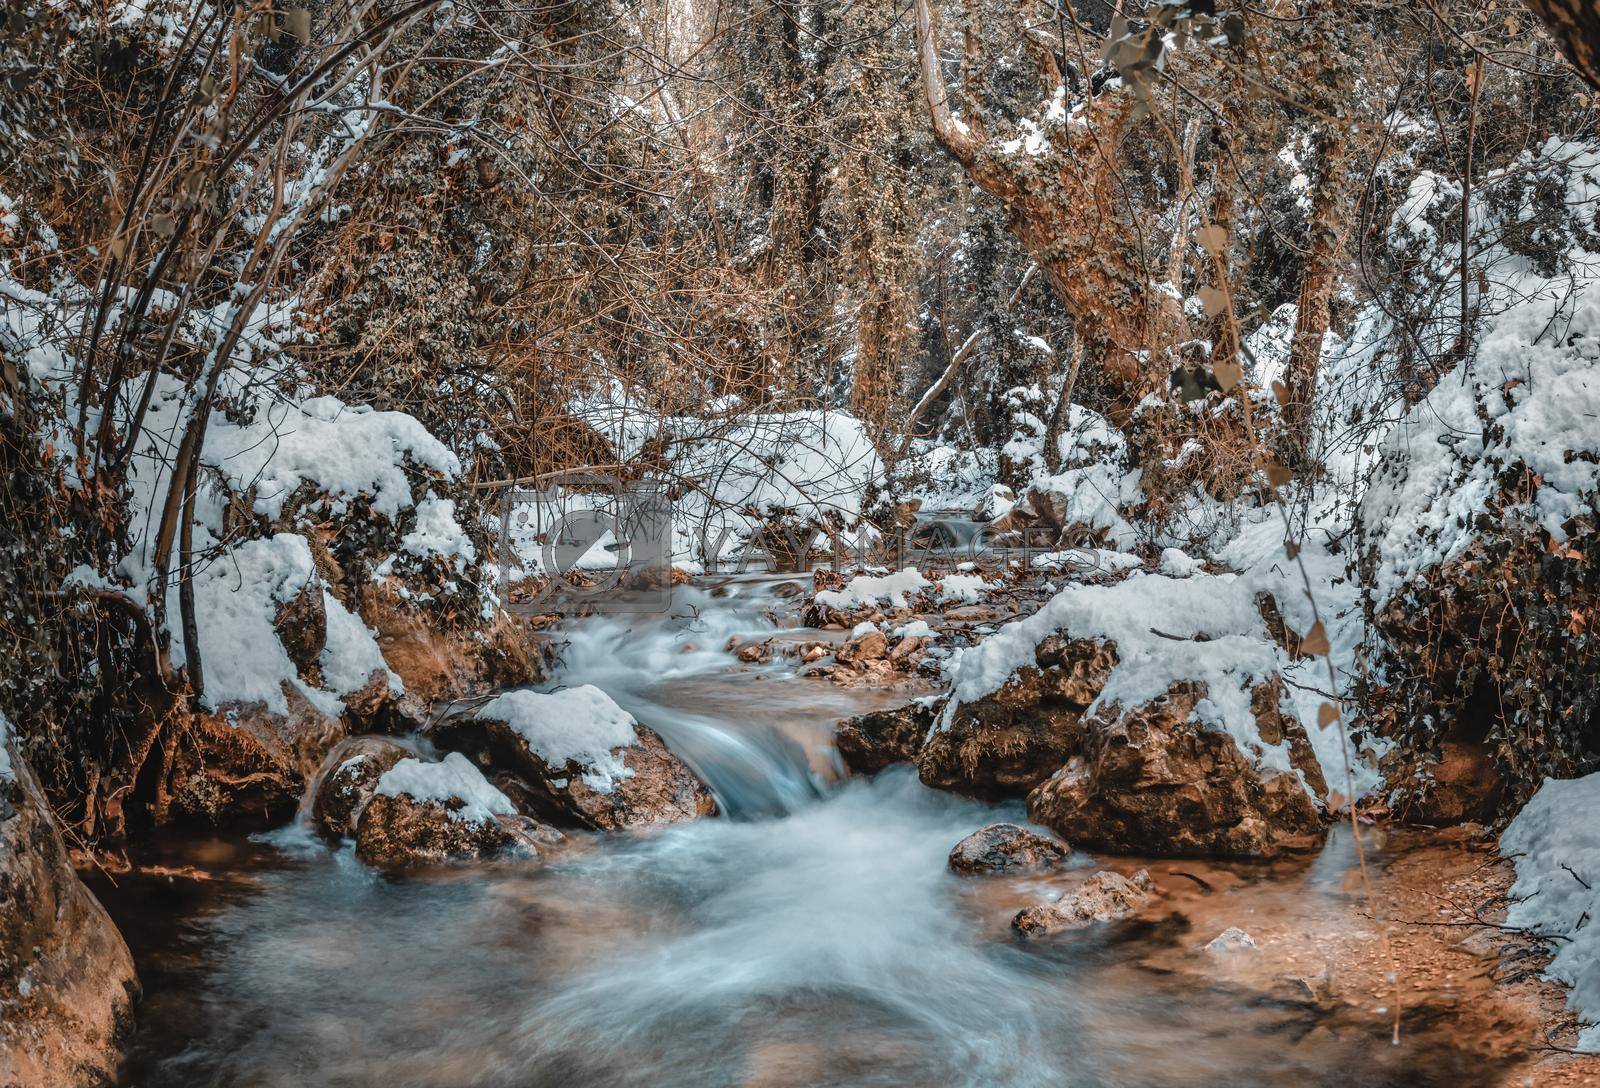 Amazing View on a Beautiful Mountainous River. Streaming Water Between Big Stones and Trees Covered with Snow. Gorgeous Winter Landscape.